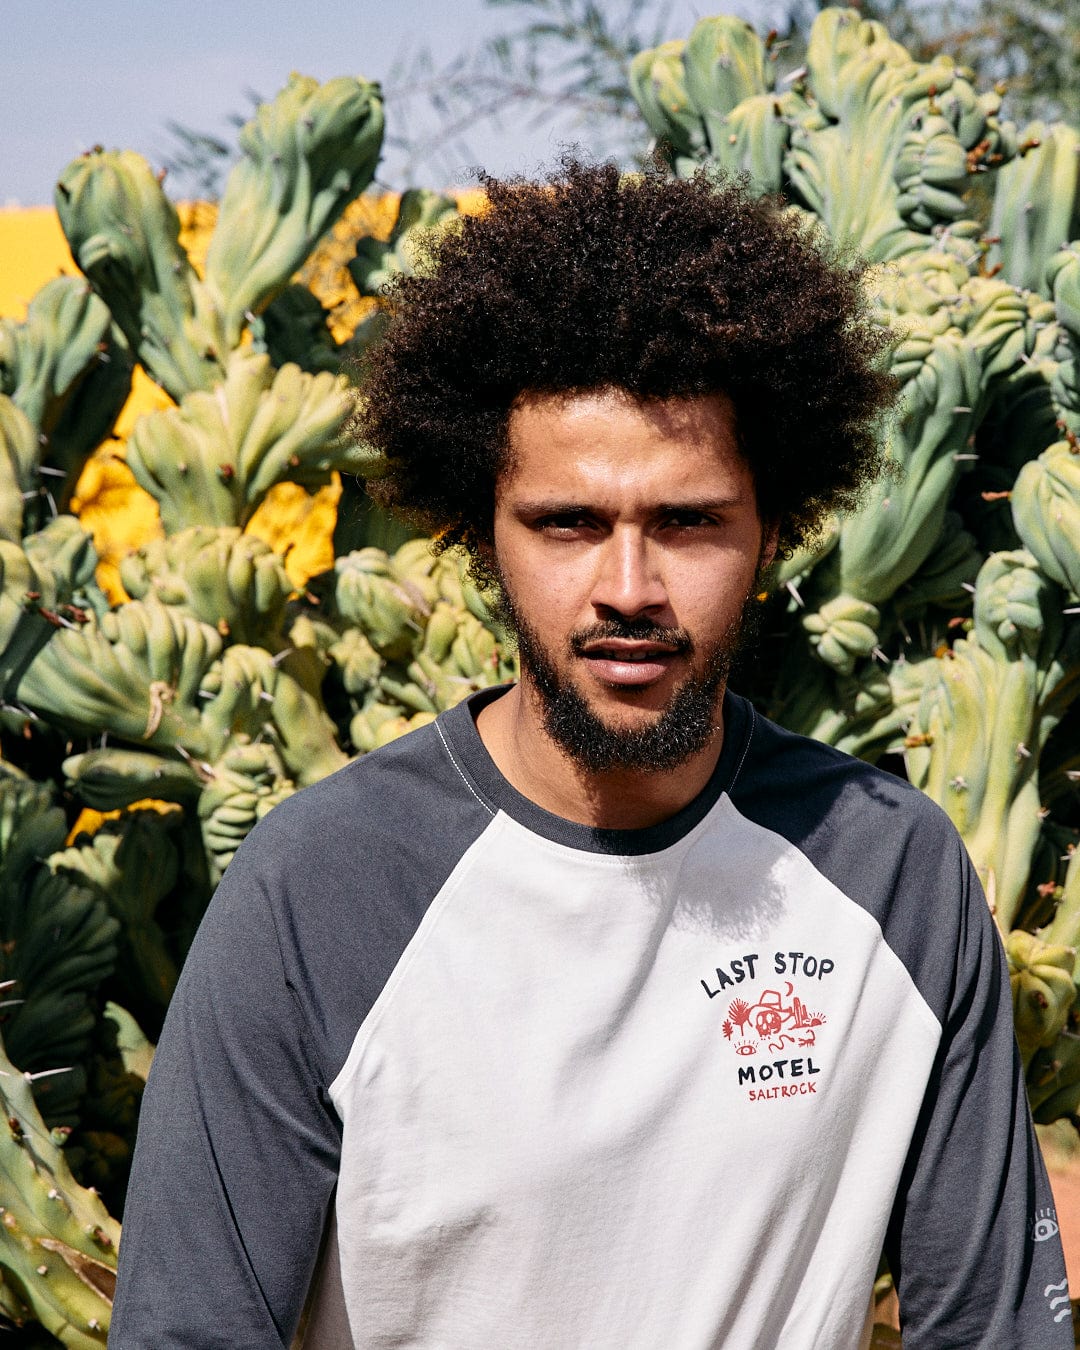 A man with curly hair wearing a Saltrock Last Stop long sleeve raglan in white stands in front of prickly pear cacti under bright sunlight.